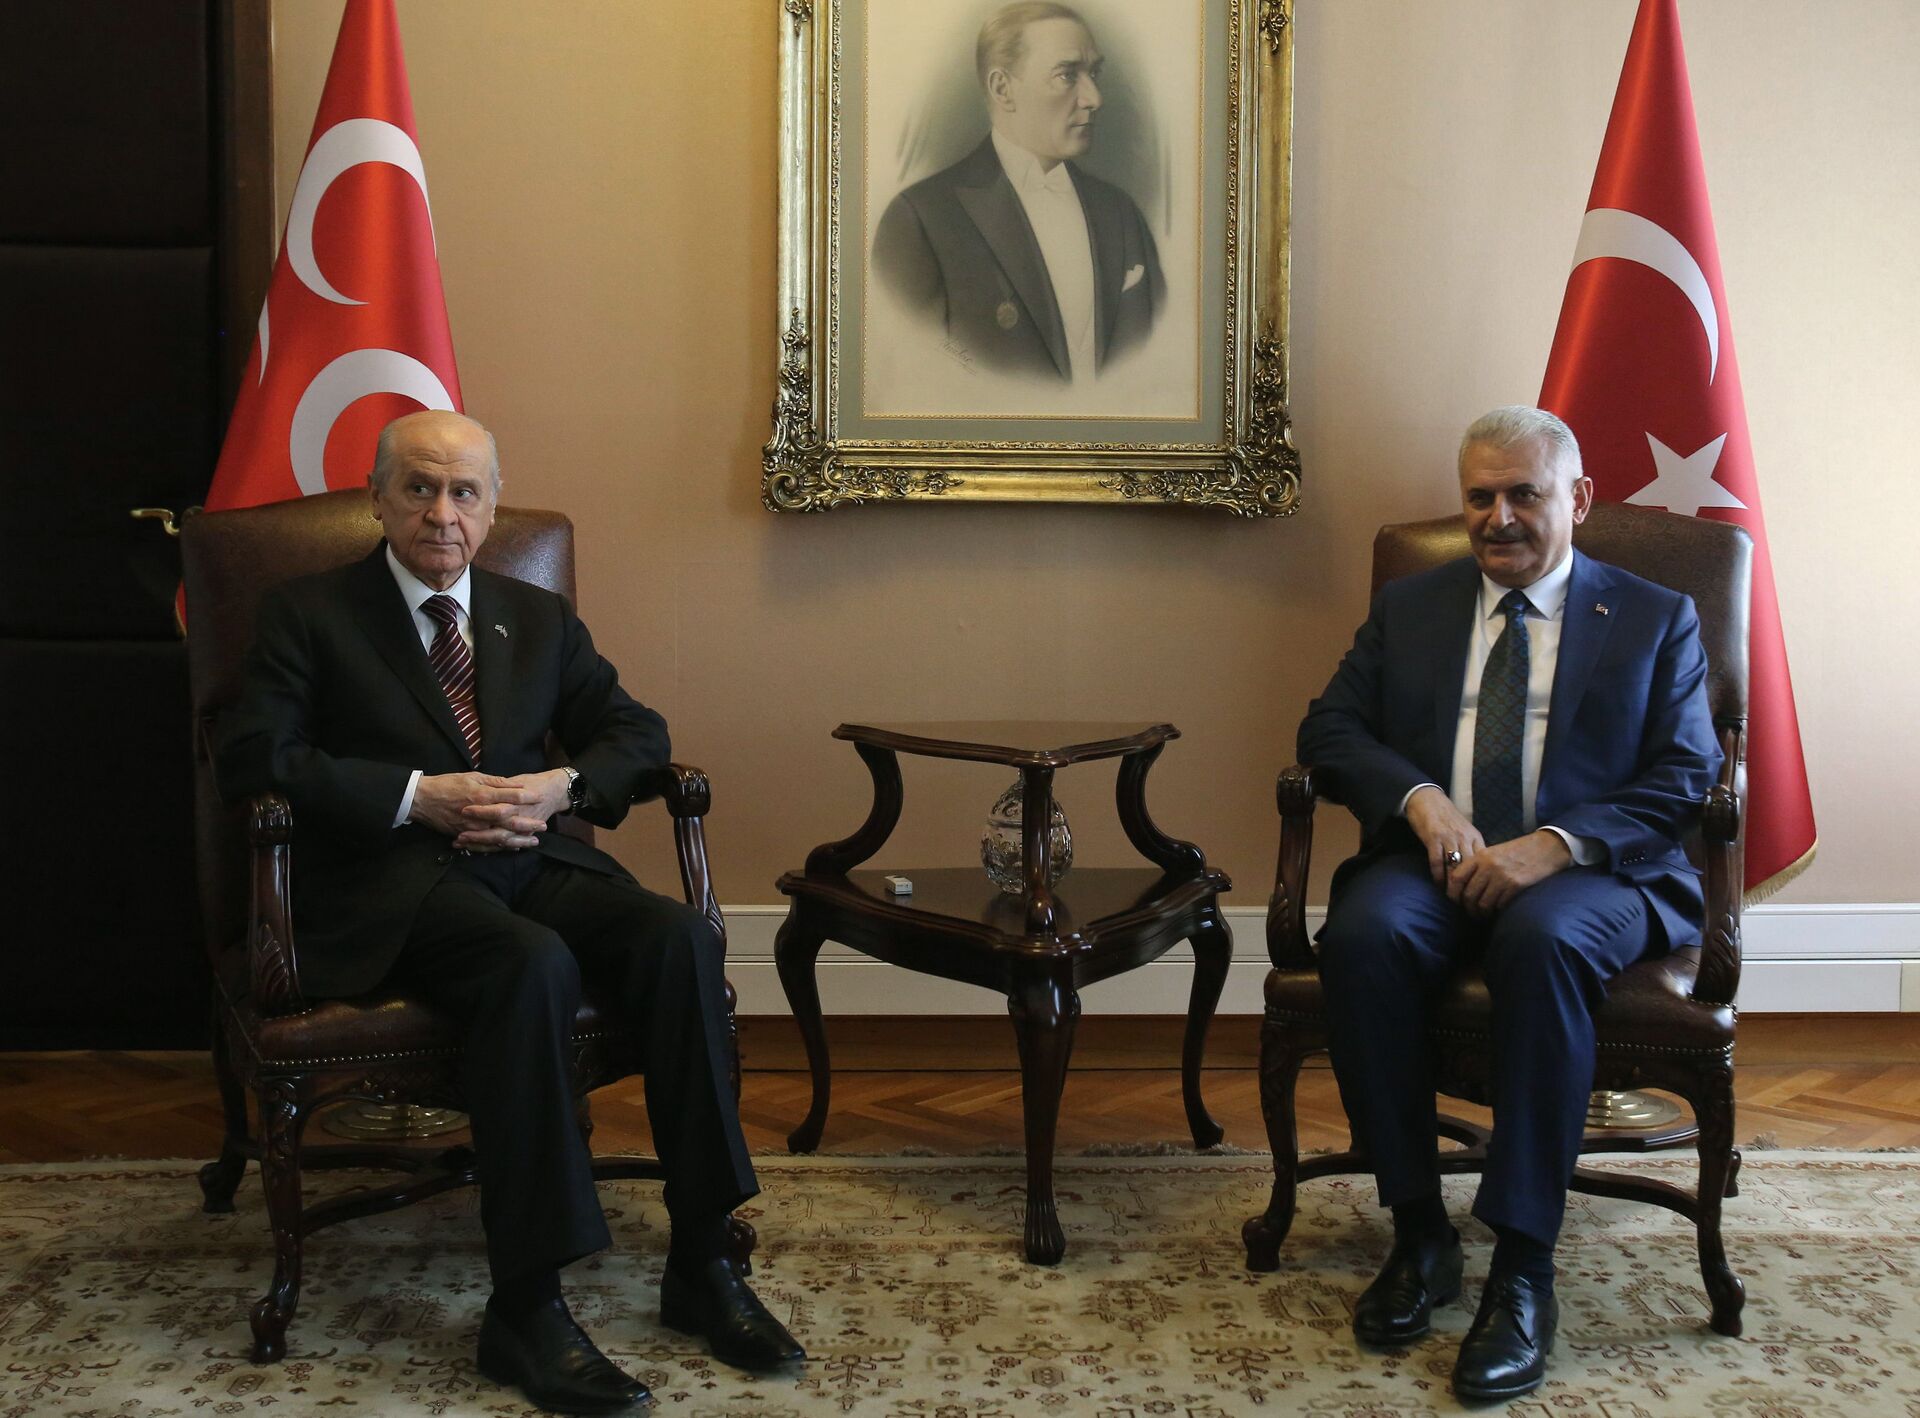 Turkish Prime Minister Binali Yildirim (R) and Nationalist Movement Party (MHP) Devlet Bahceli (L) pose for a photograph during their meeting at Turkish Grand National Assembly (TBMM) in Ankara, on August 01, 2016 - Sputnik International, 1920, 10.07.2022